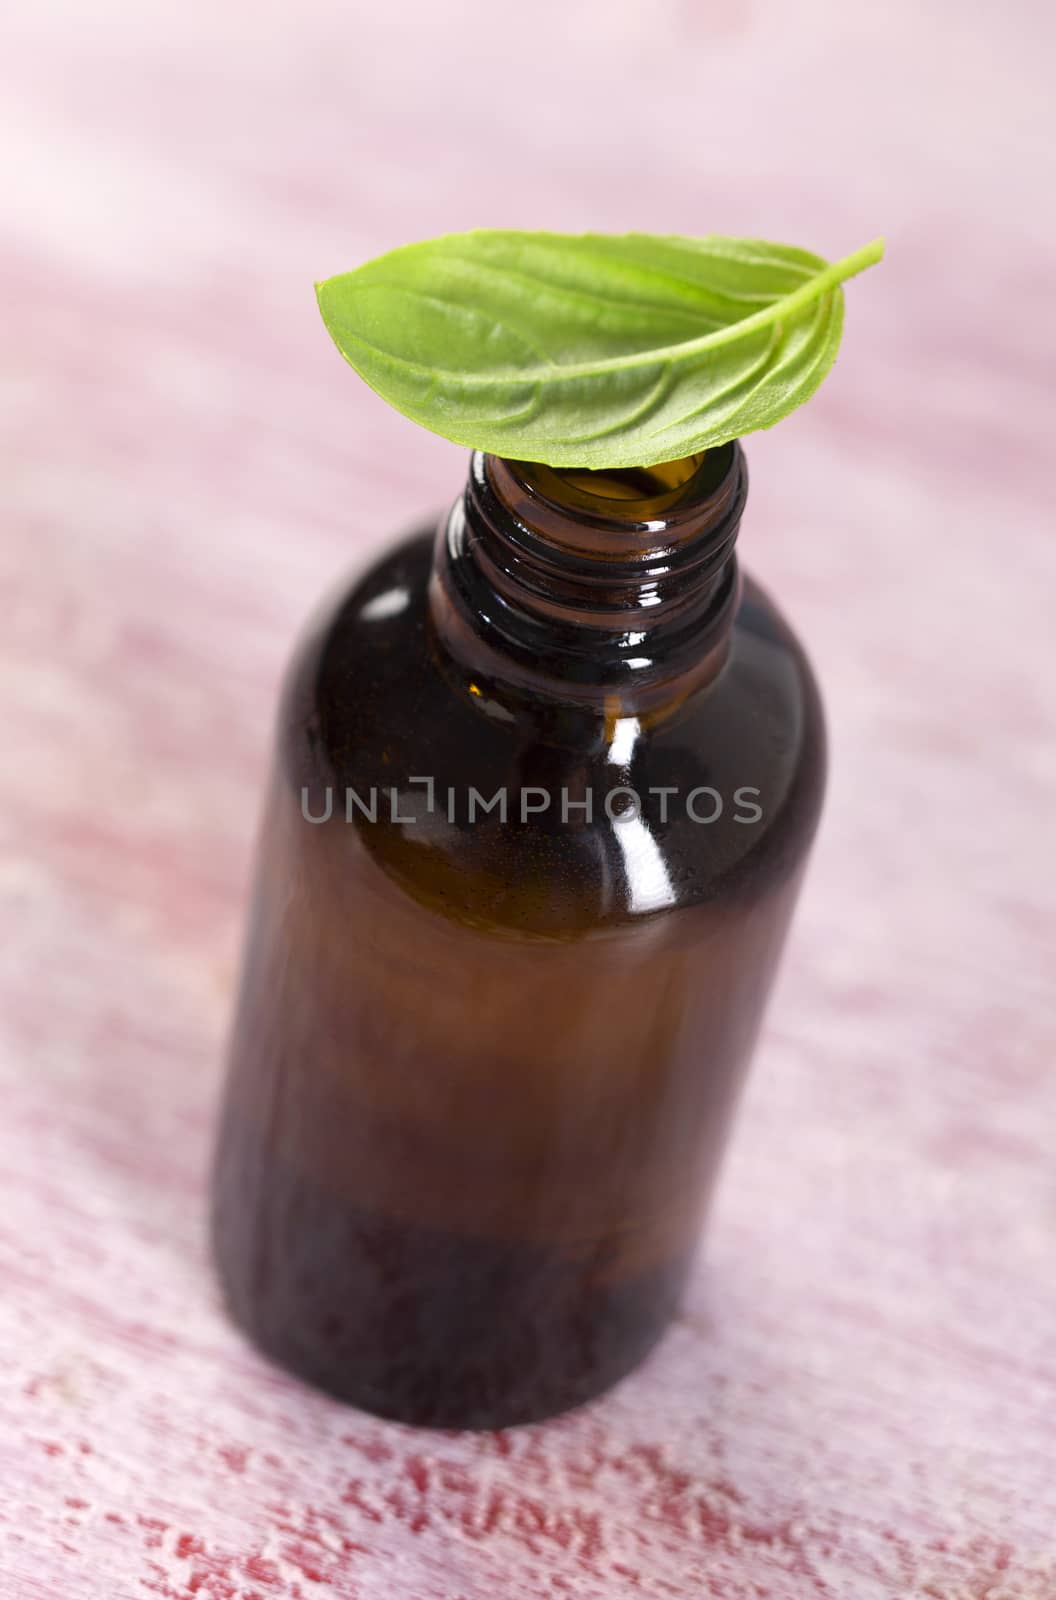 Aromatherapy - Basil essential oil bottle  by JPC-PROD